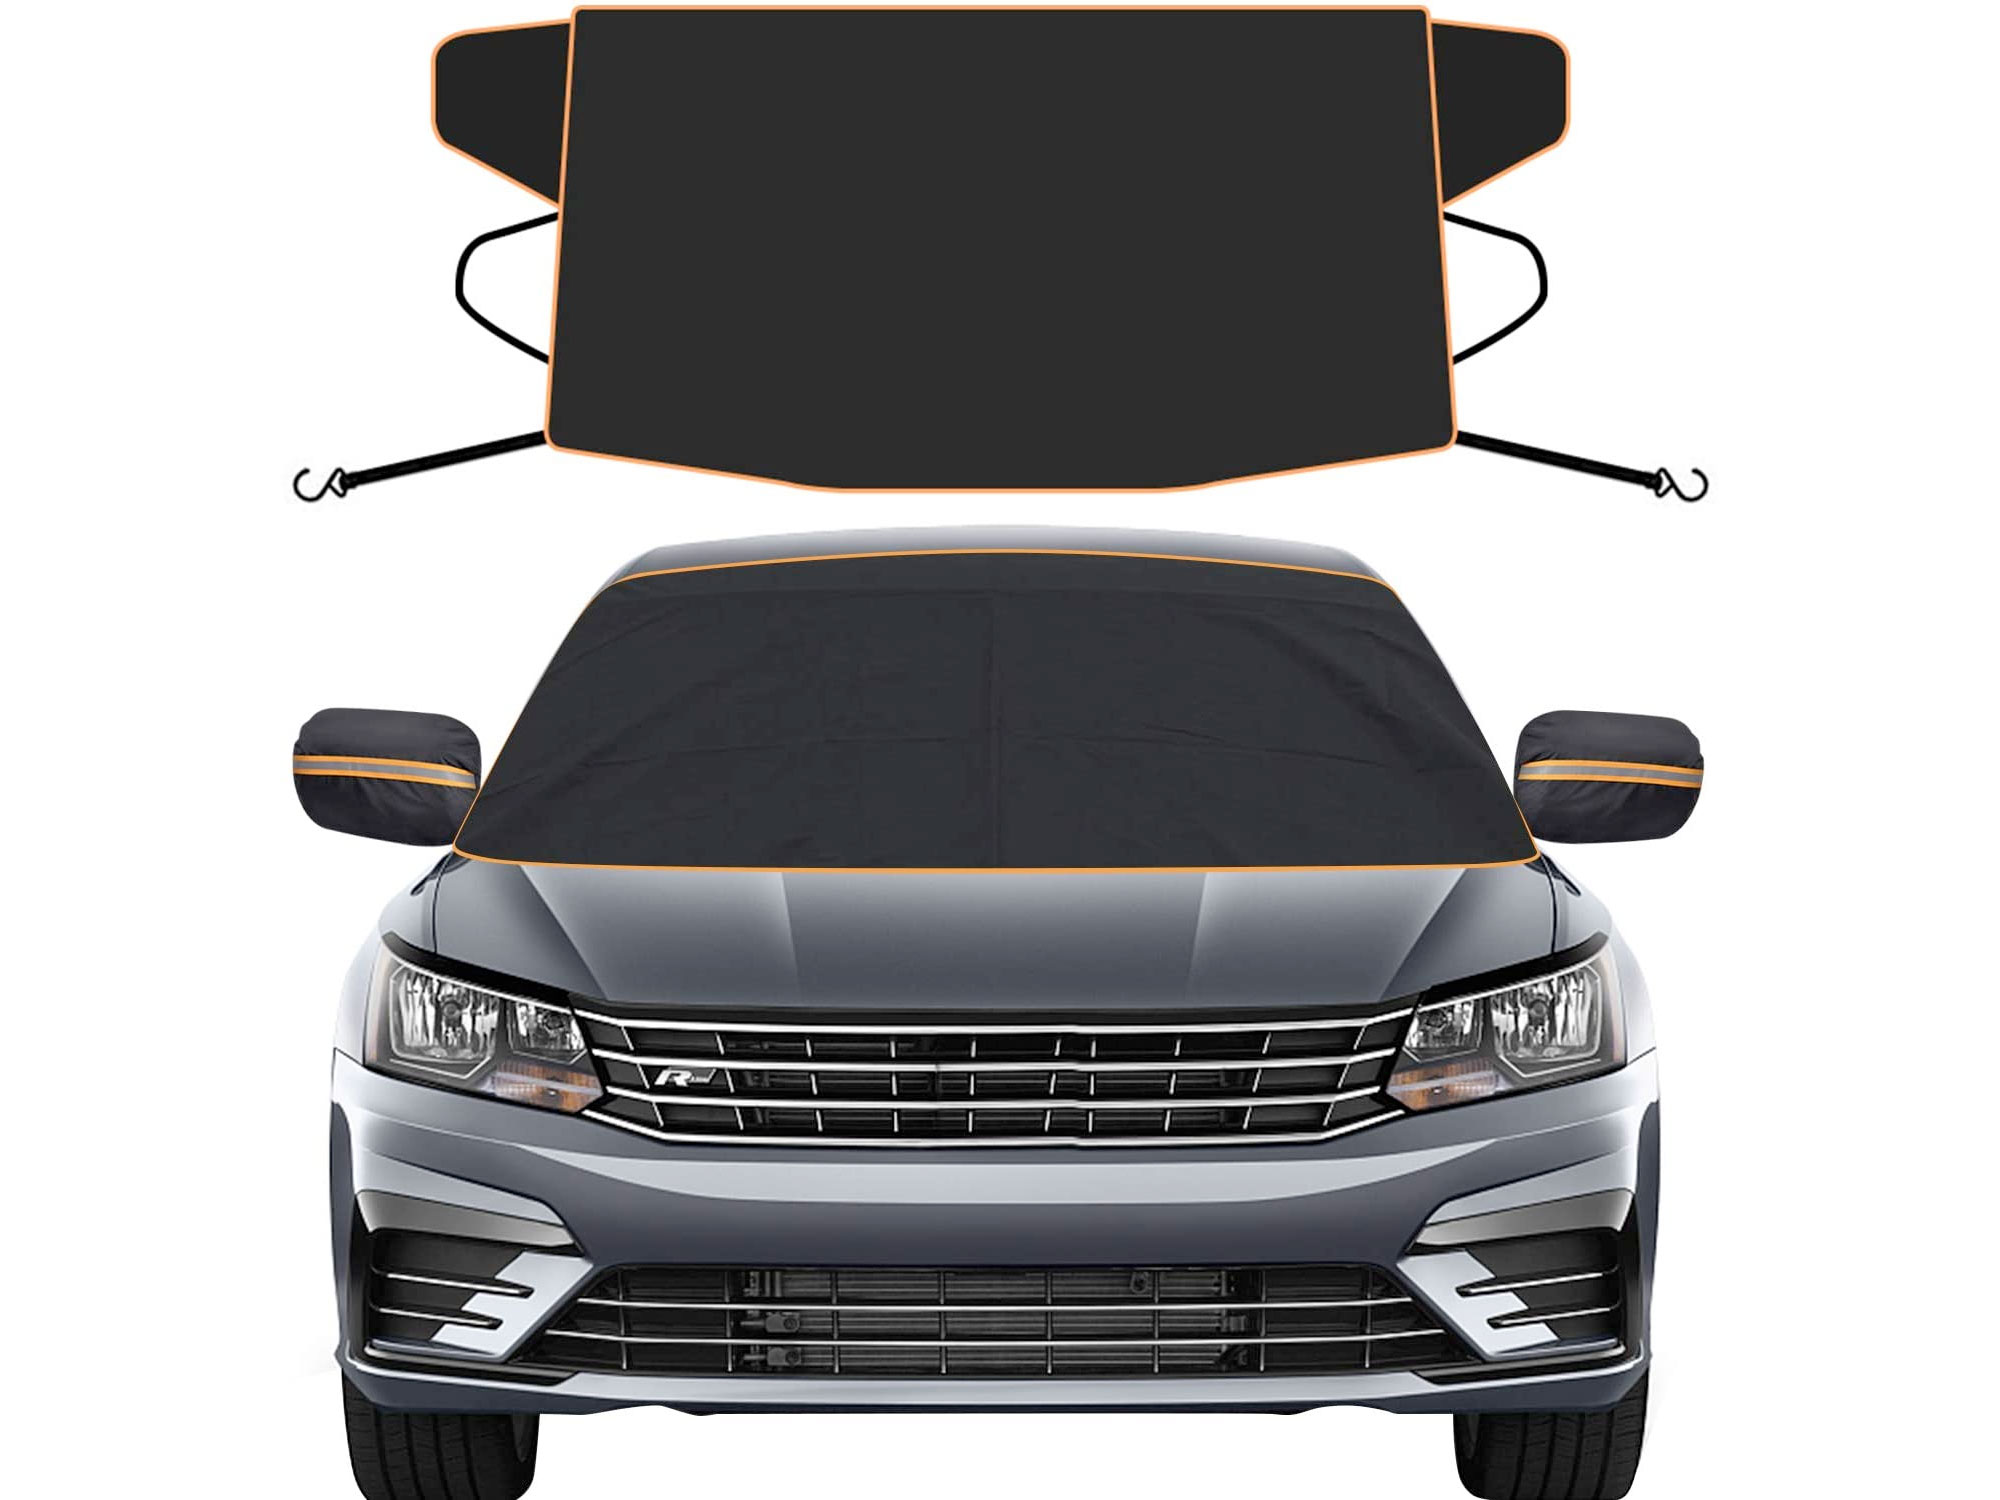 Amazon：Windshield Snow Cover for Winter (Small Cars Only)只賣$12